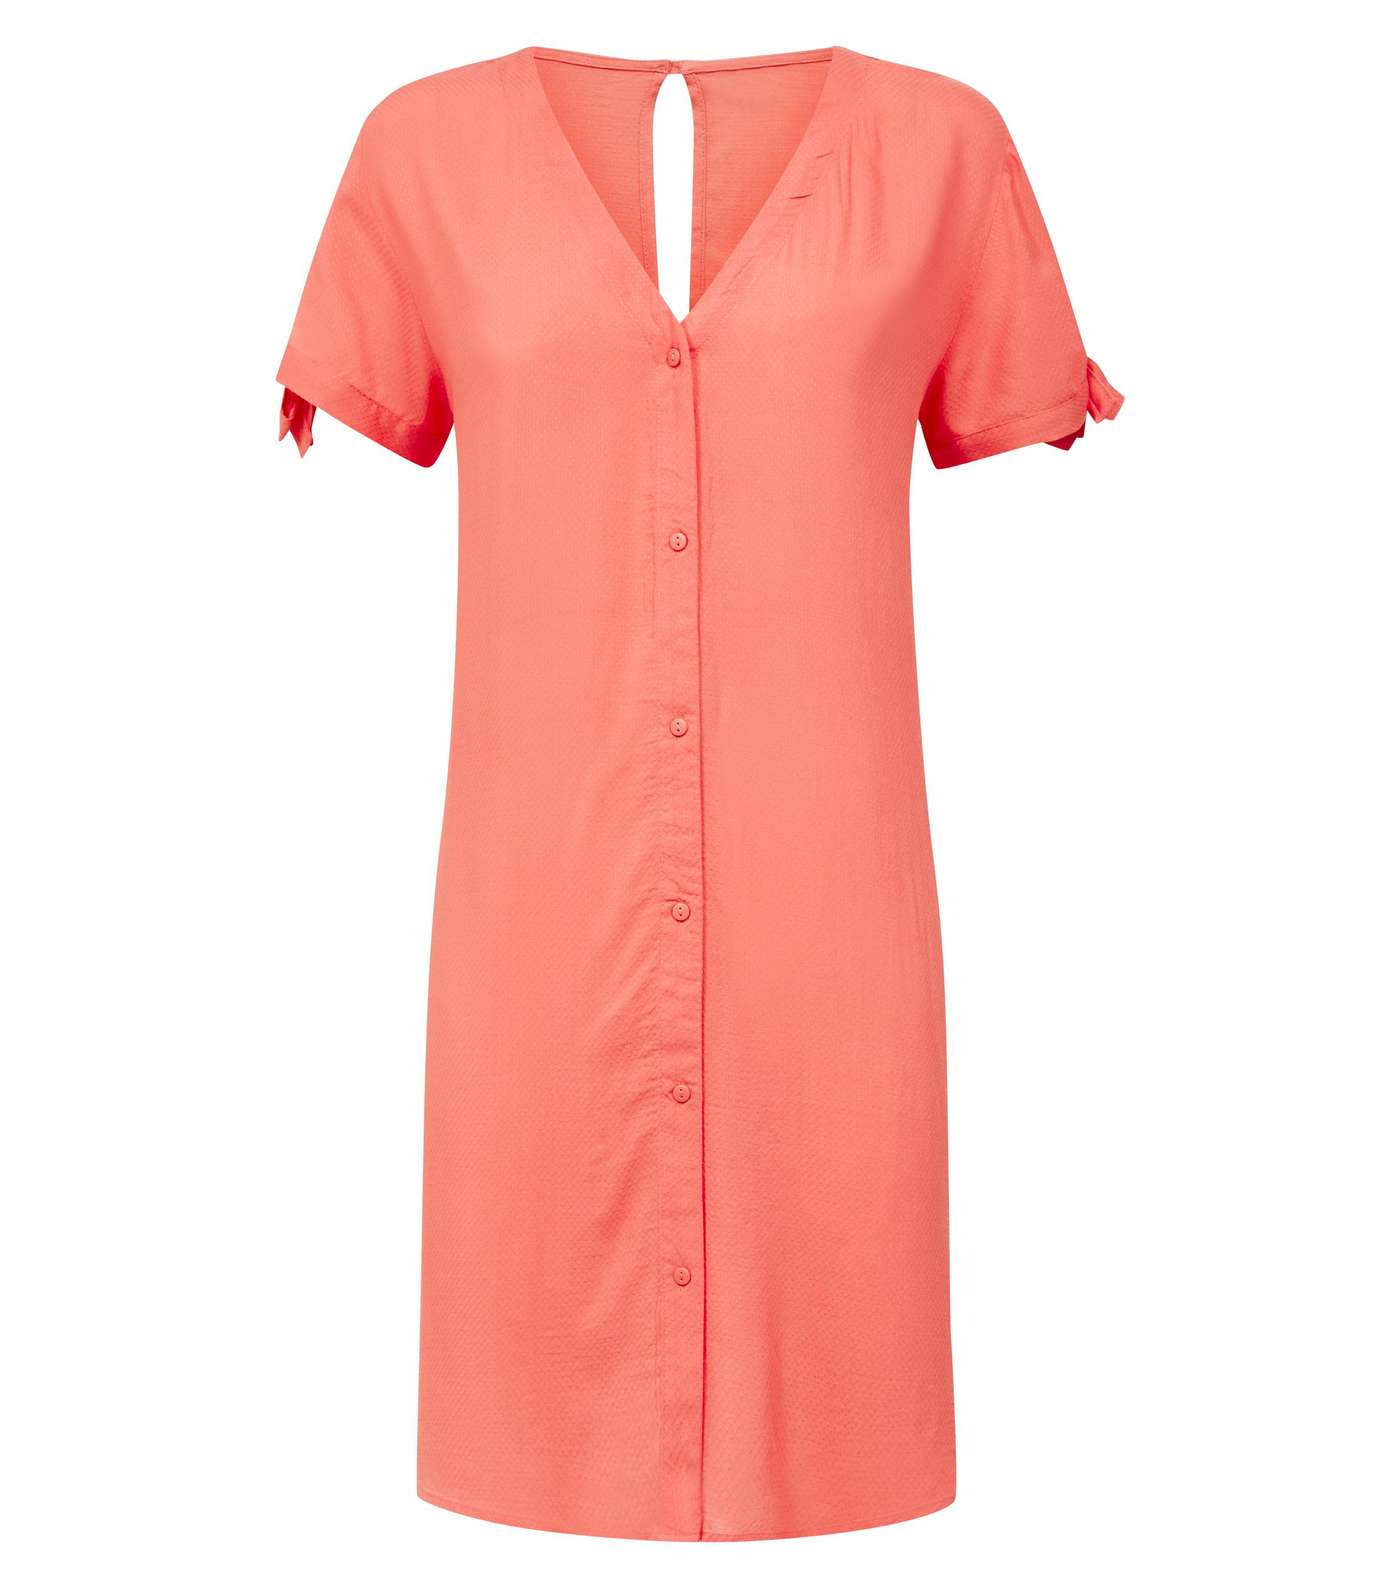 JDY Bright Pink Button Front Dress Image 4